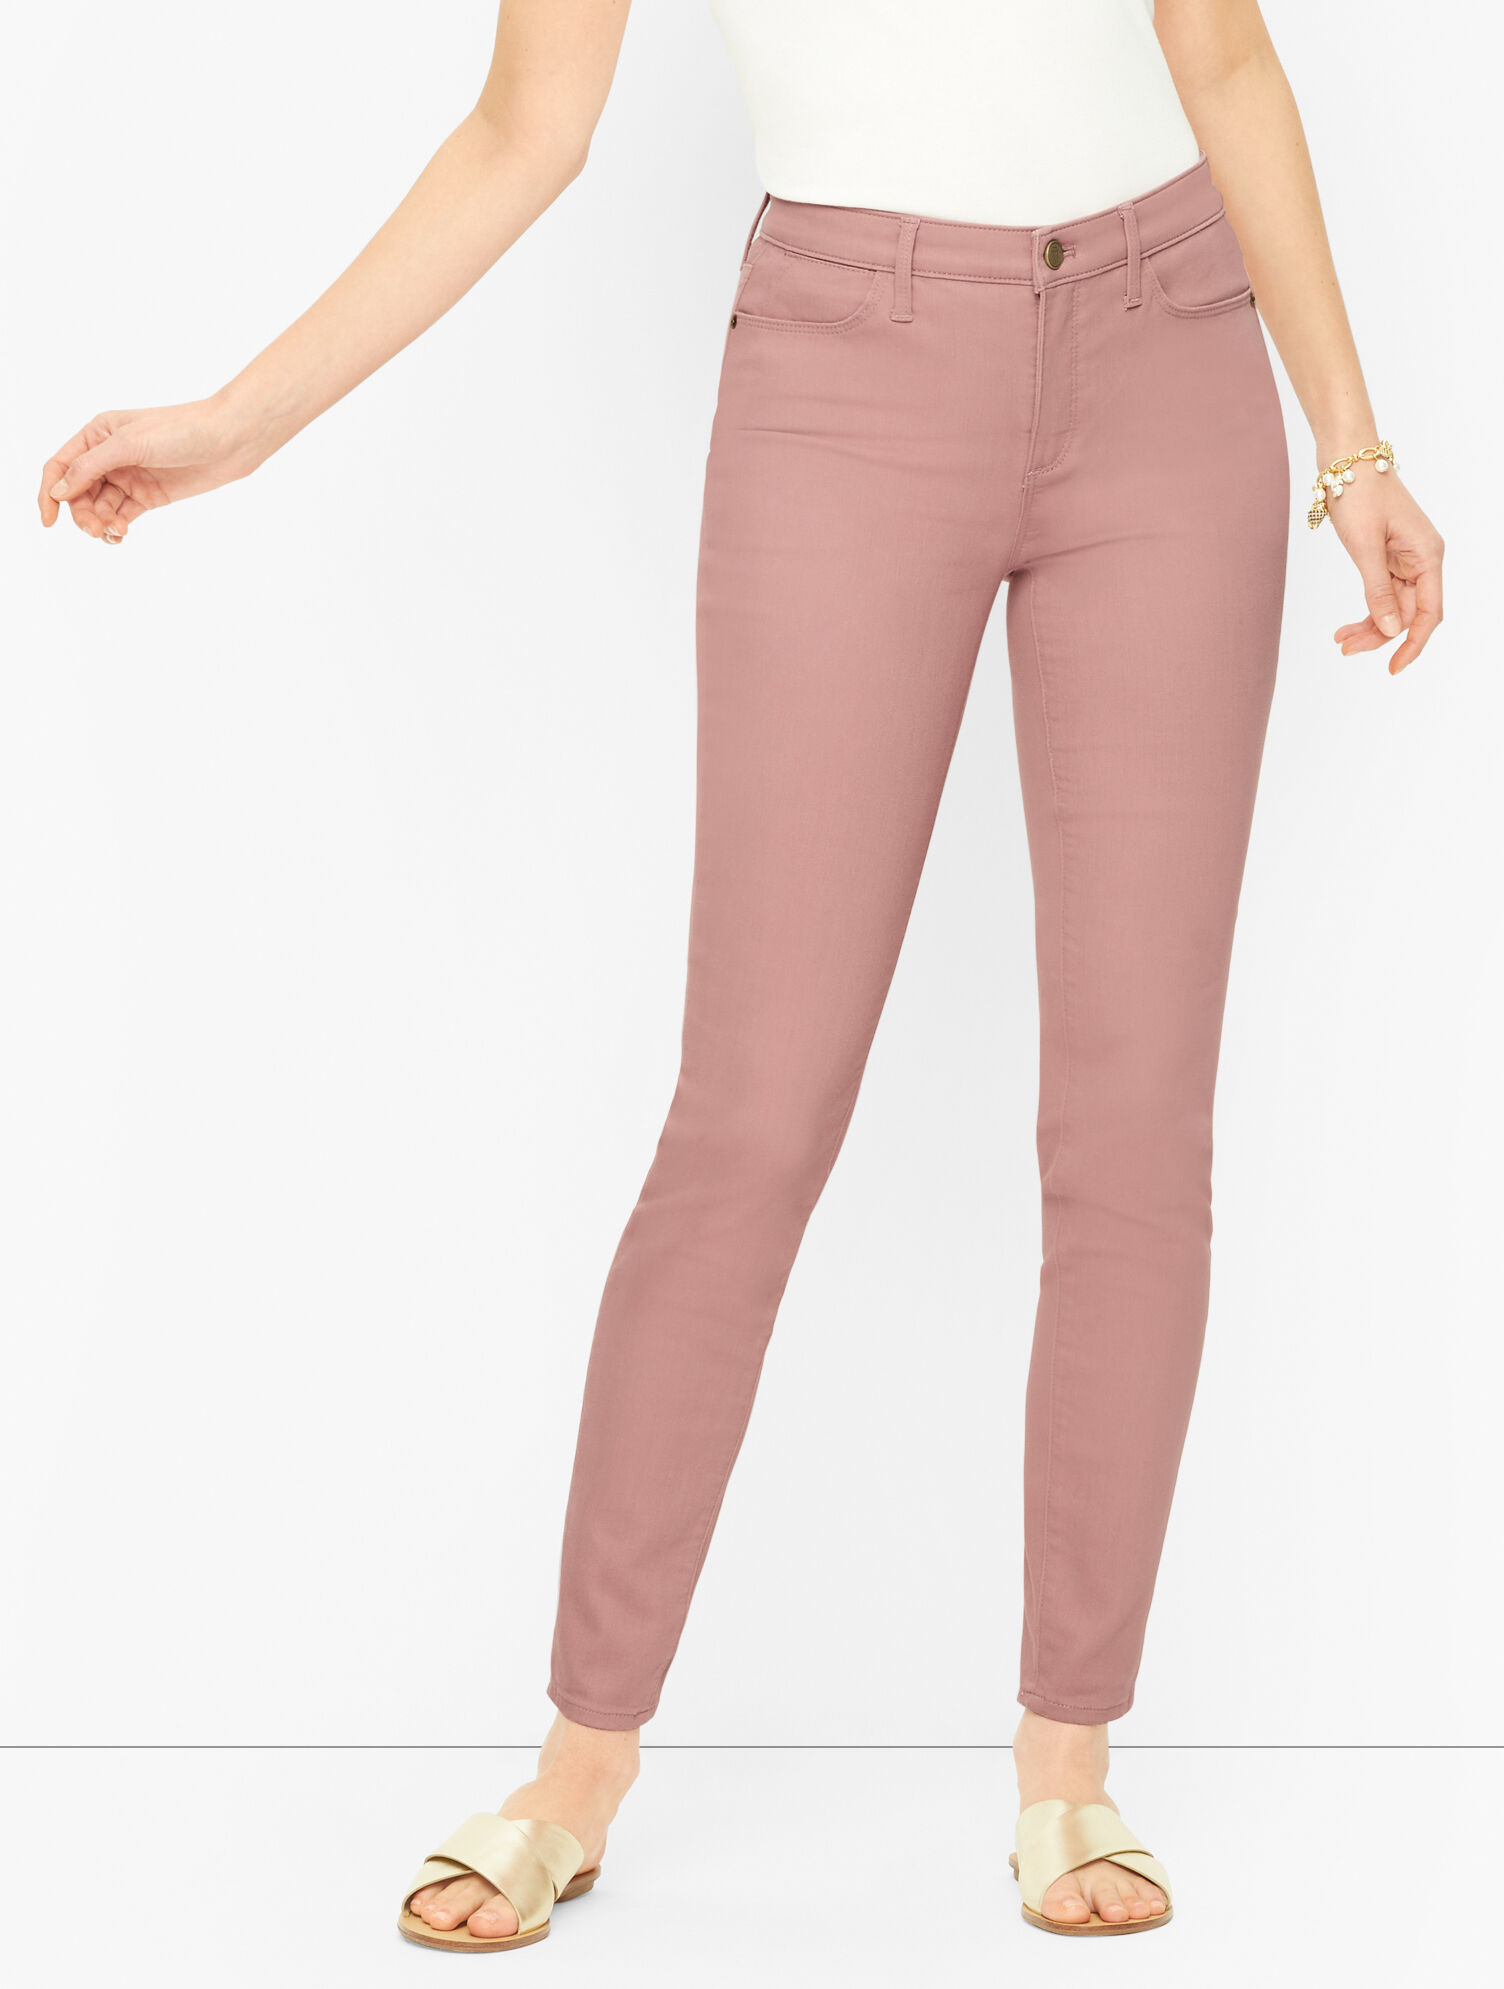 Buy Pink Jeans & Jeggings for Girls by Go Colors Online